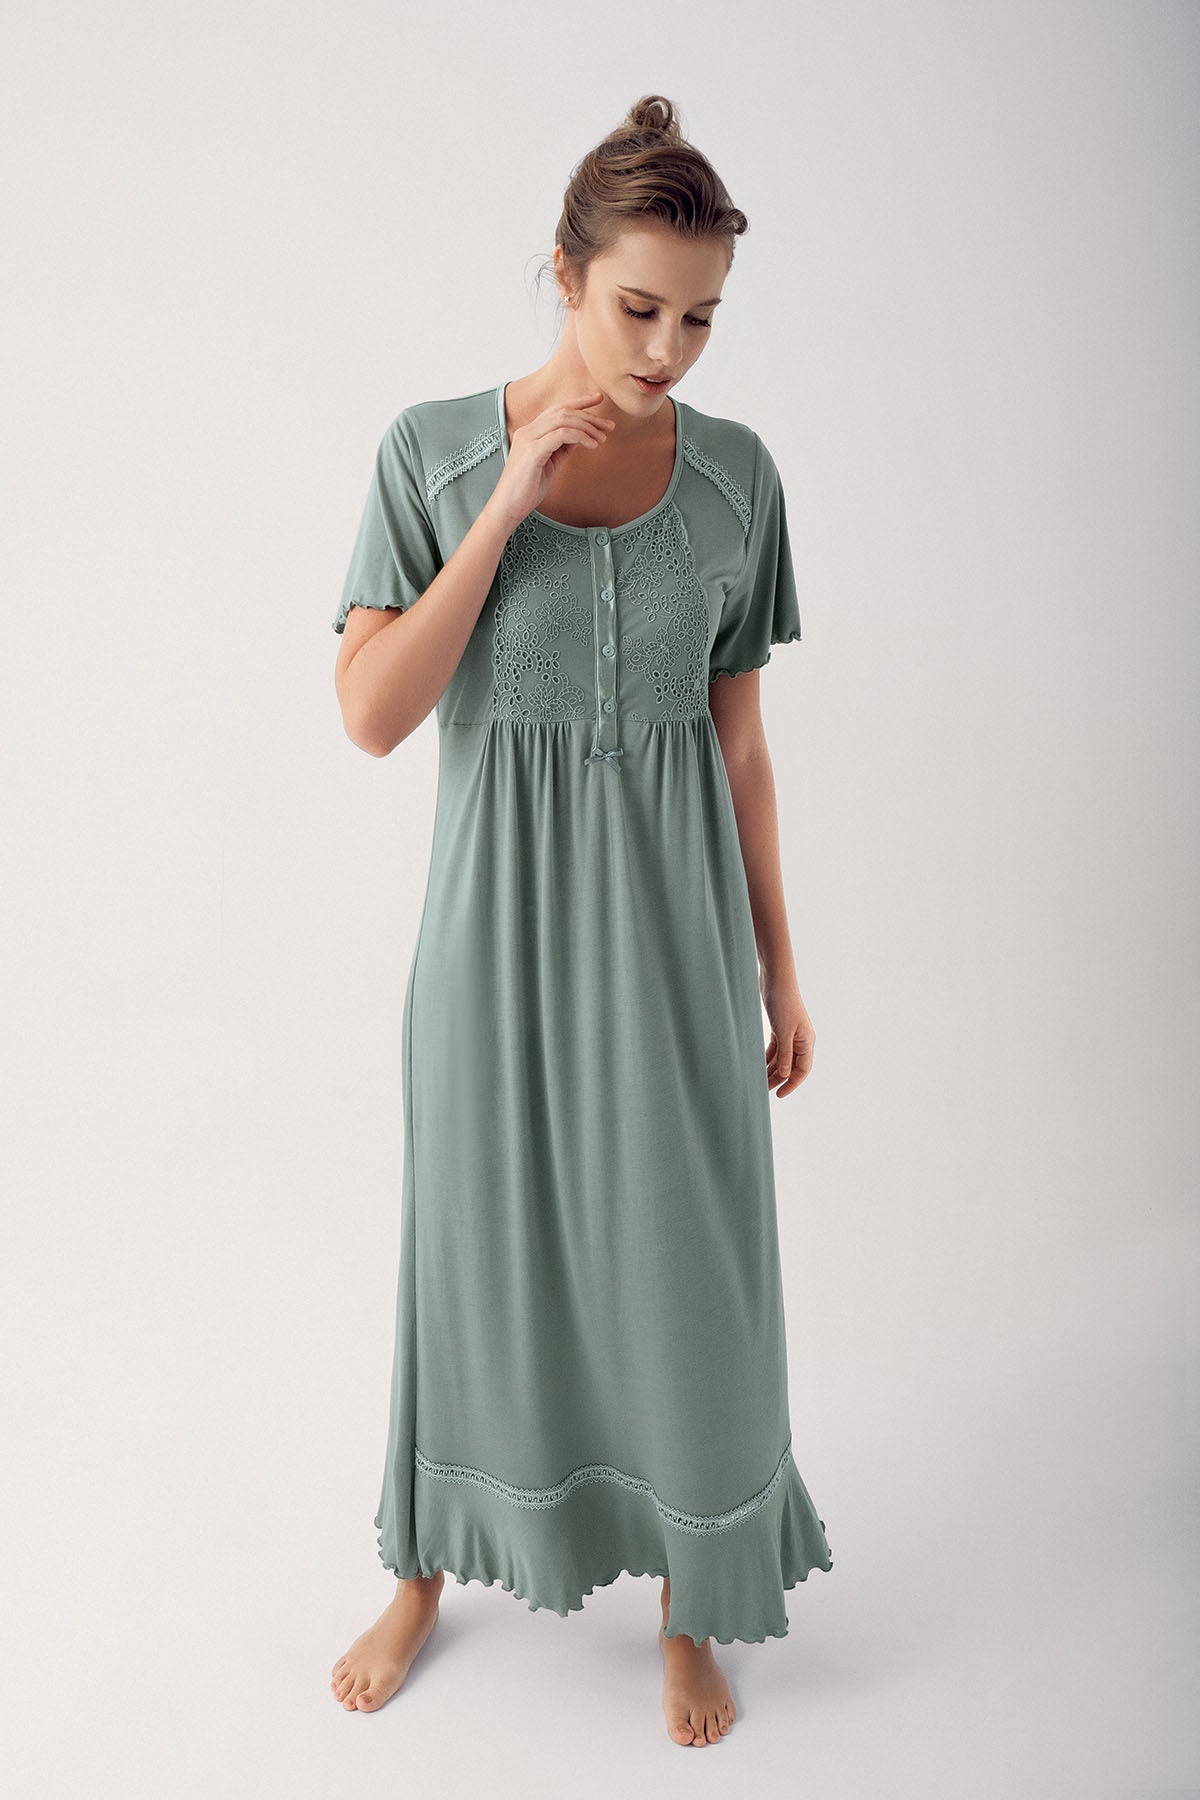 Shopymommy 14101 Collar And Skirt Detail Maternity & Nursing Nightgown Green